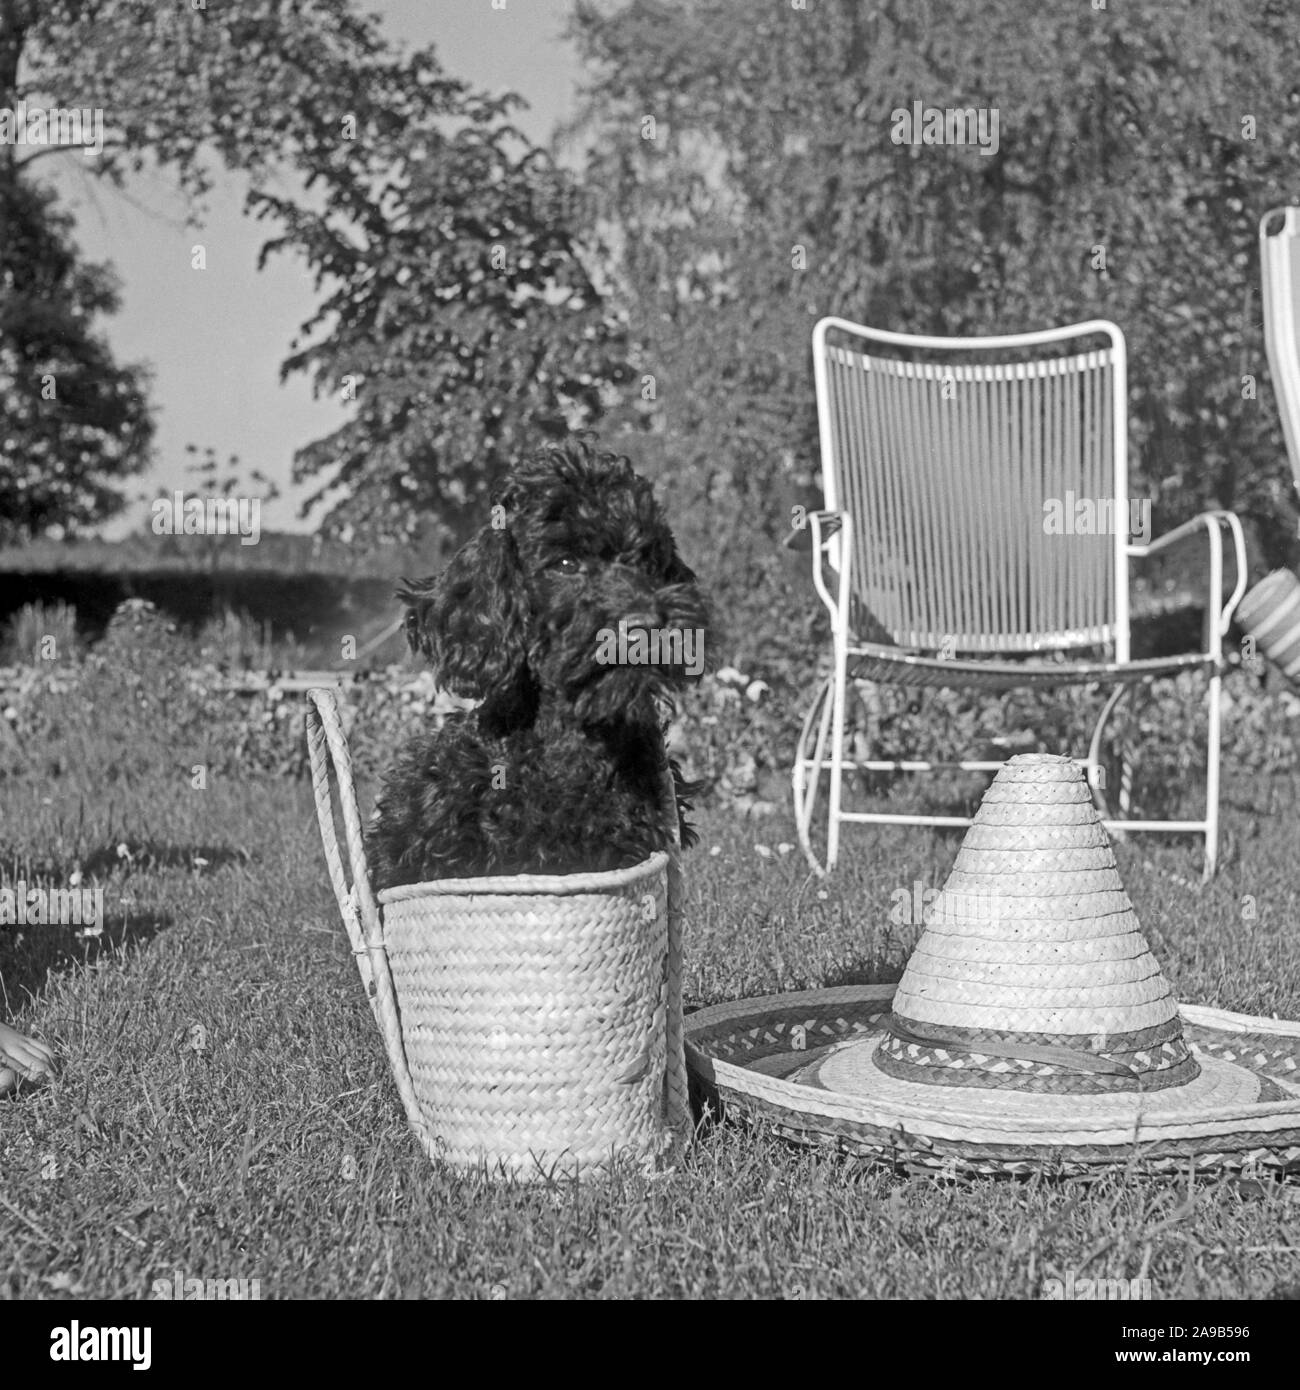 A poodle in a basket with a Mexican hat at the garden, Germany 1959 Stock Photo